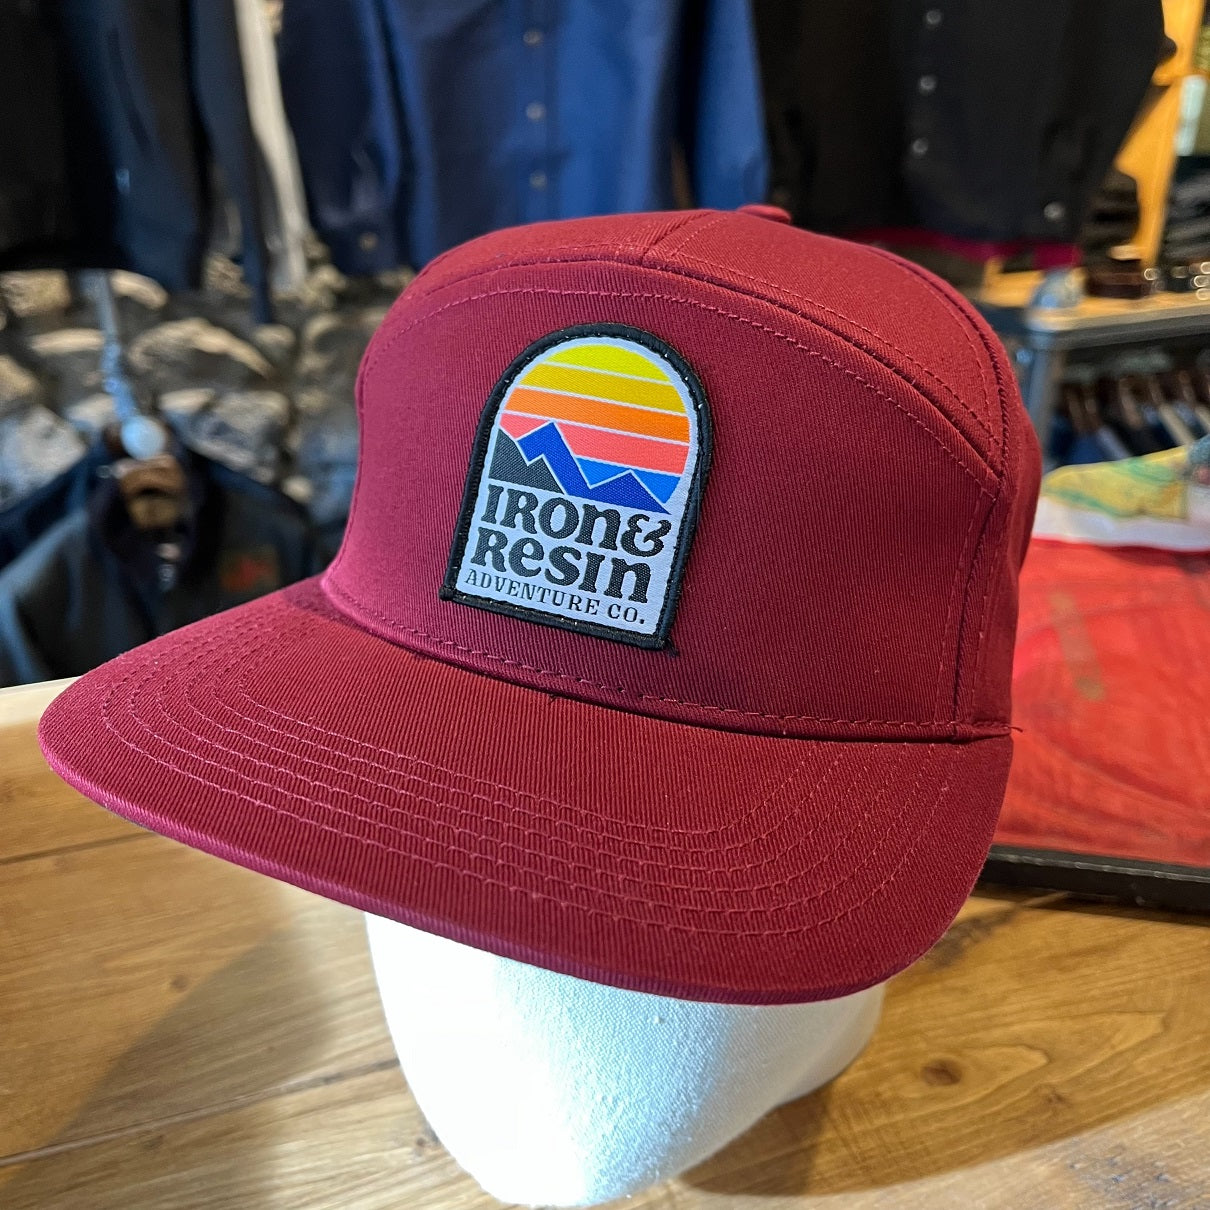 IRON AND RESIN ADVENTURE CO HAT